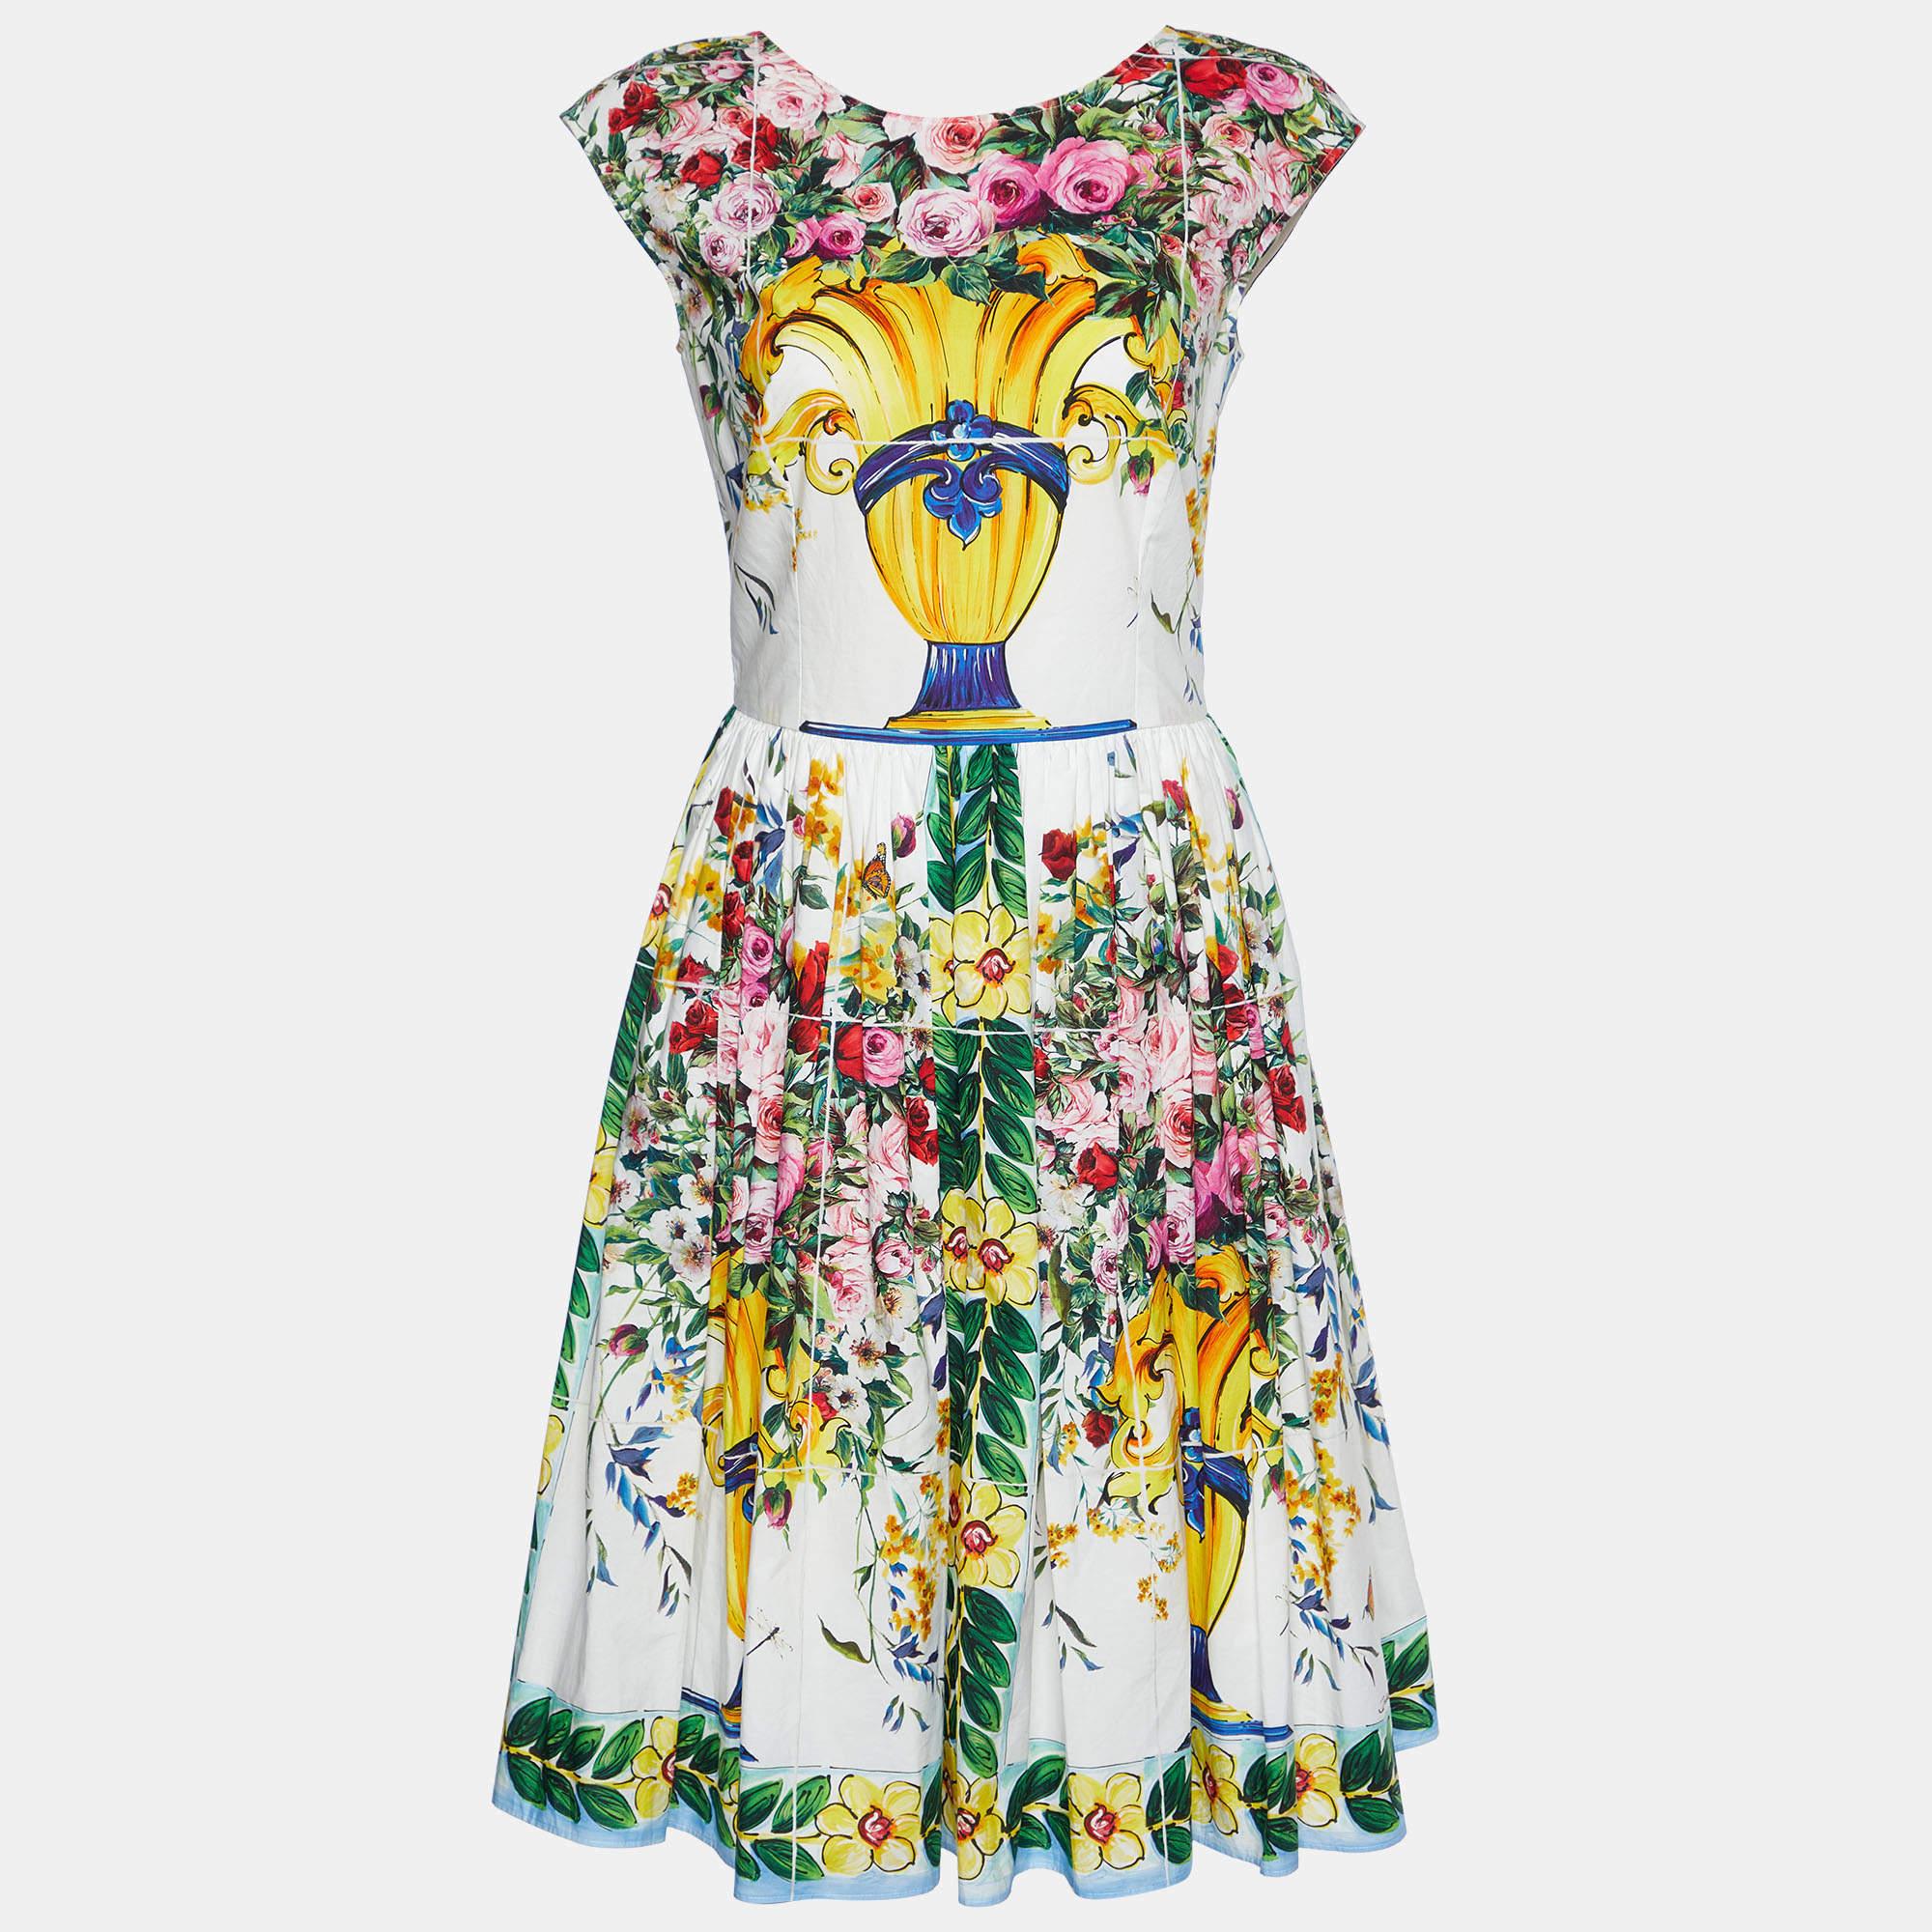 The Dolce & Gabbana dress is a stunning fashion piece. Crafted from high-quality cotton, it features a white background adorned with vibrant Majolica-style rose prints. This midi-length dress offers a flattering silhouette and exudes Italian luxury,